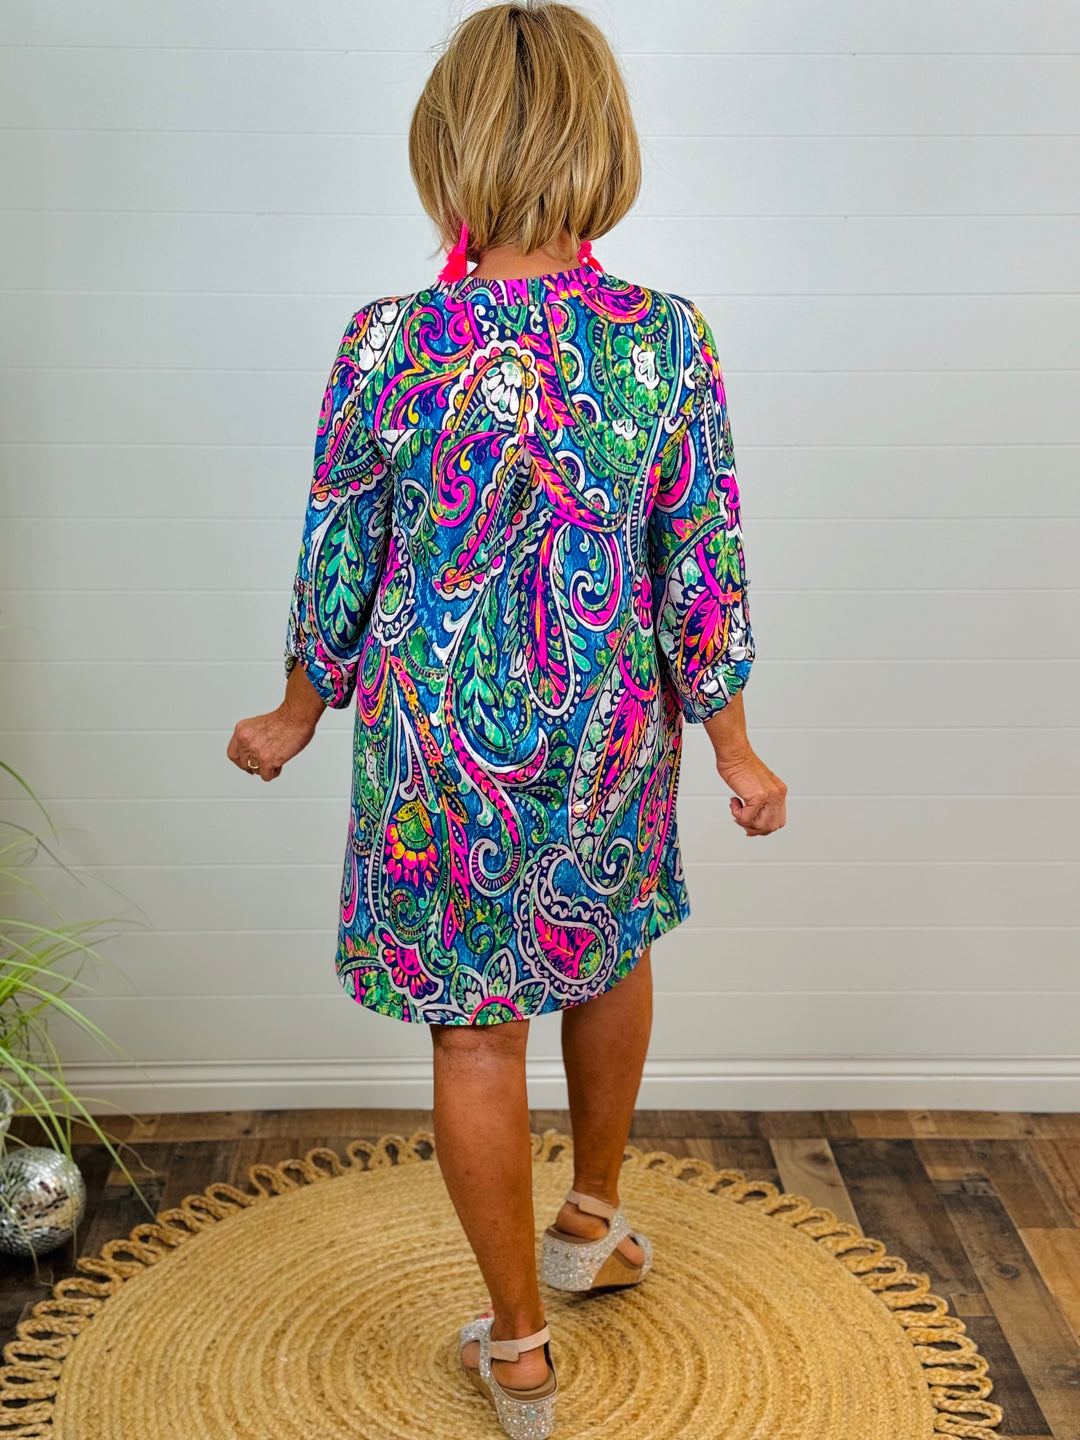 Royal Multi-Colored Print Shift Dress - Available Small Through Extended Sizes